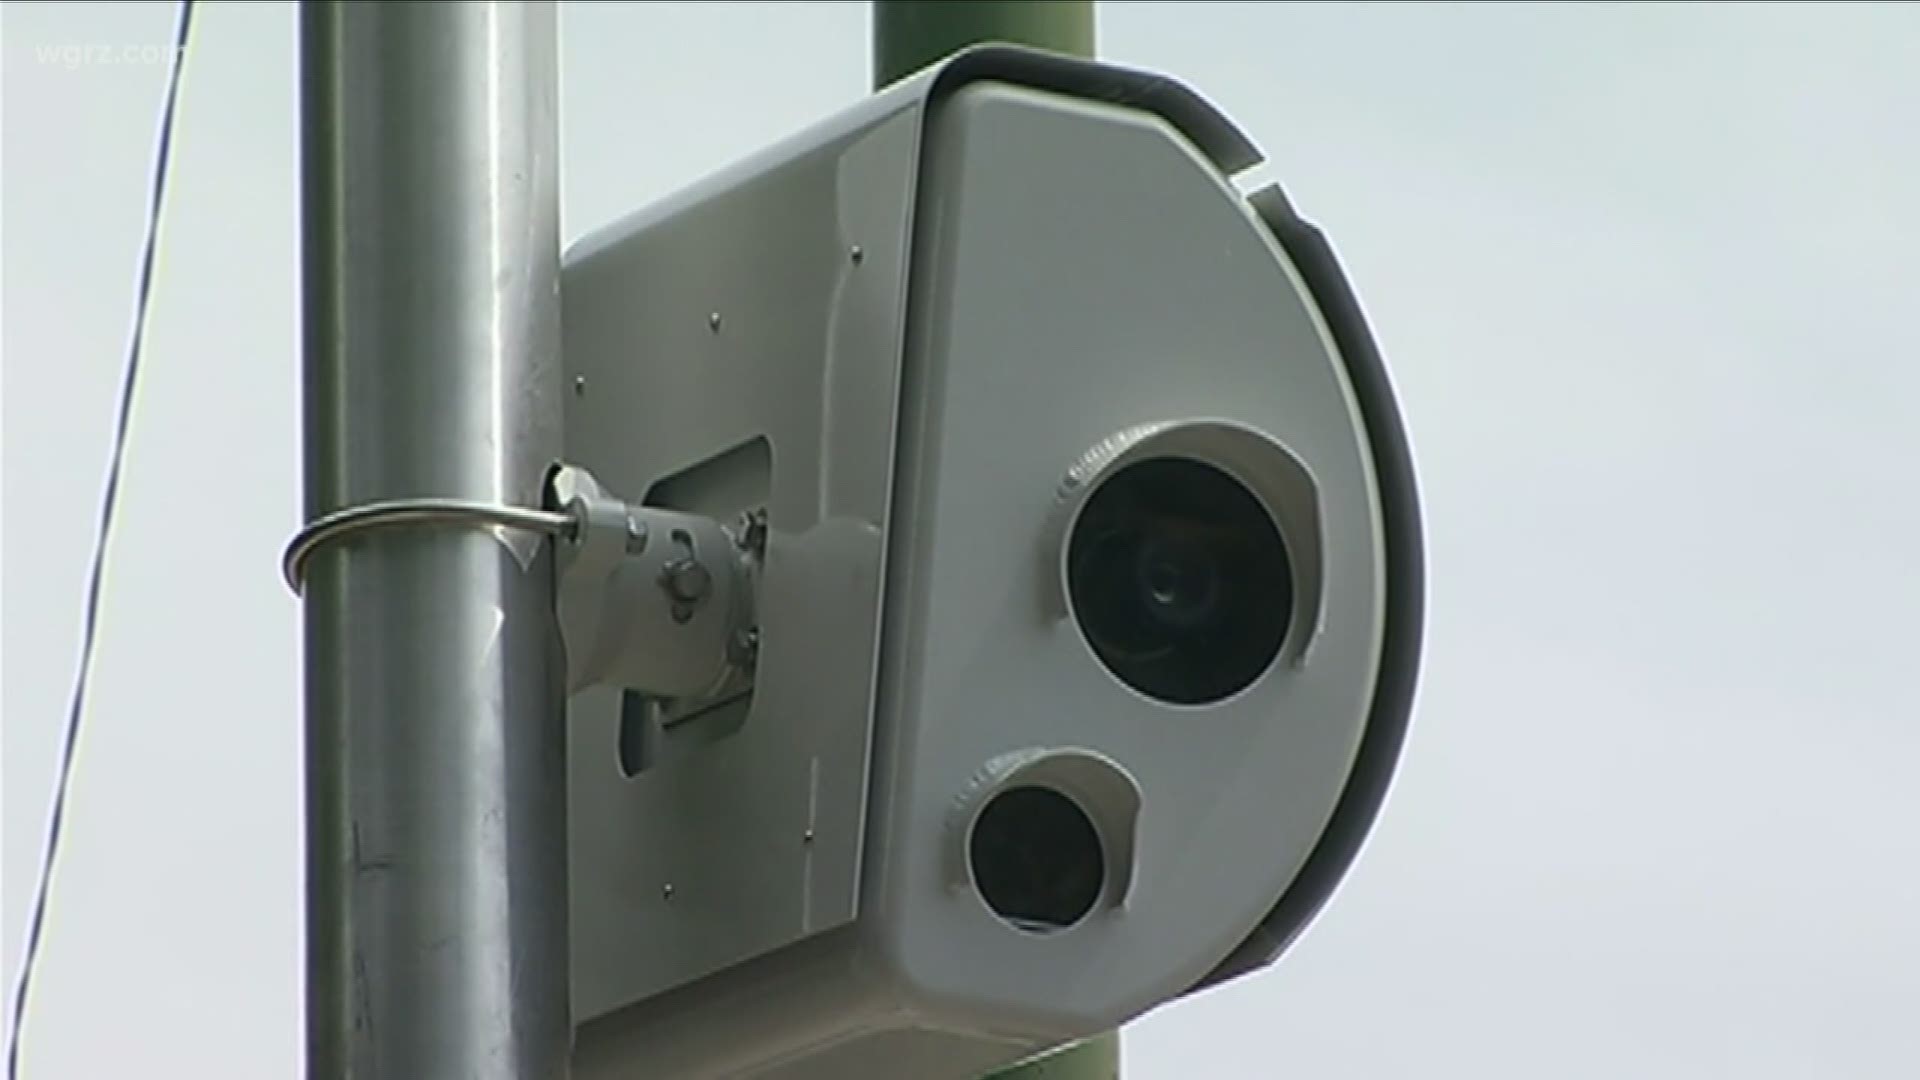 police figure the first of the cameras will be up and running, by perhaps the end of the month.